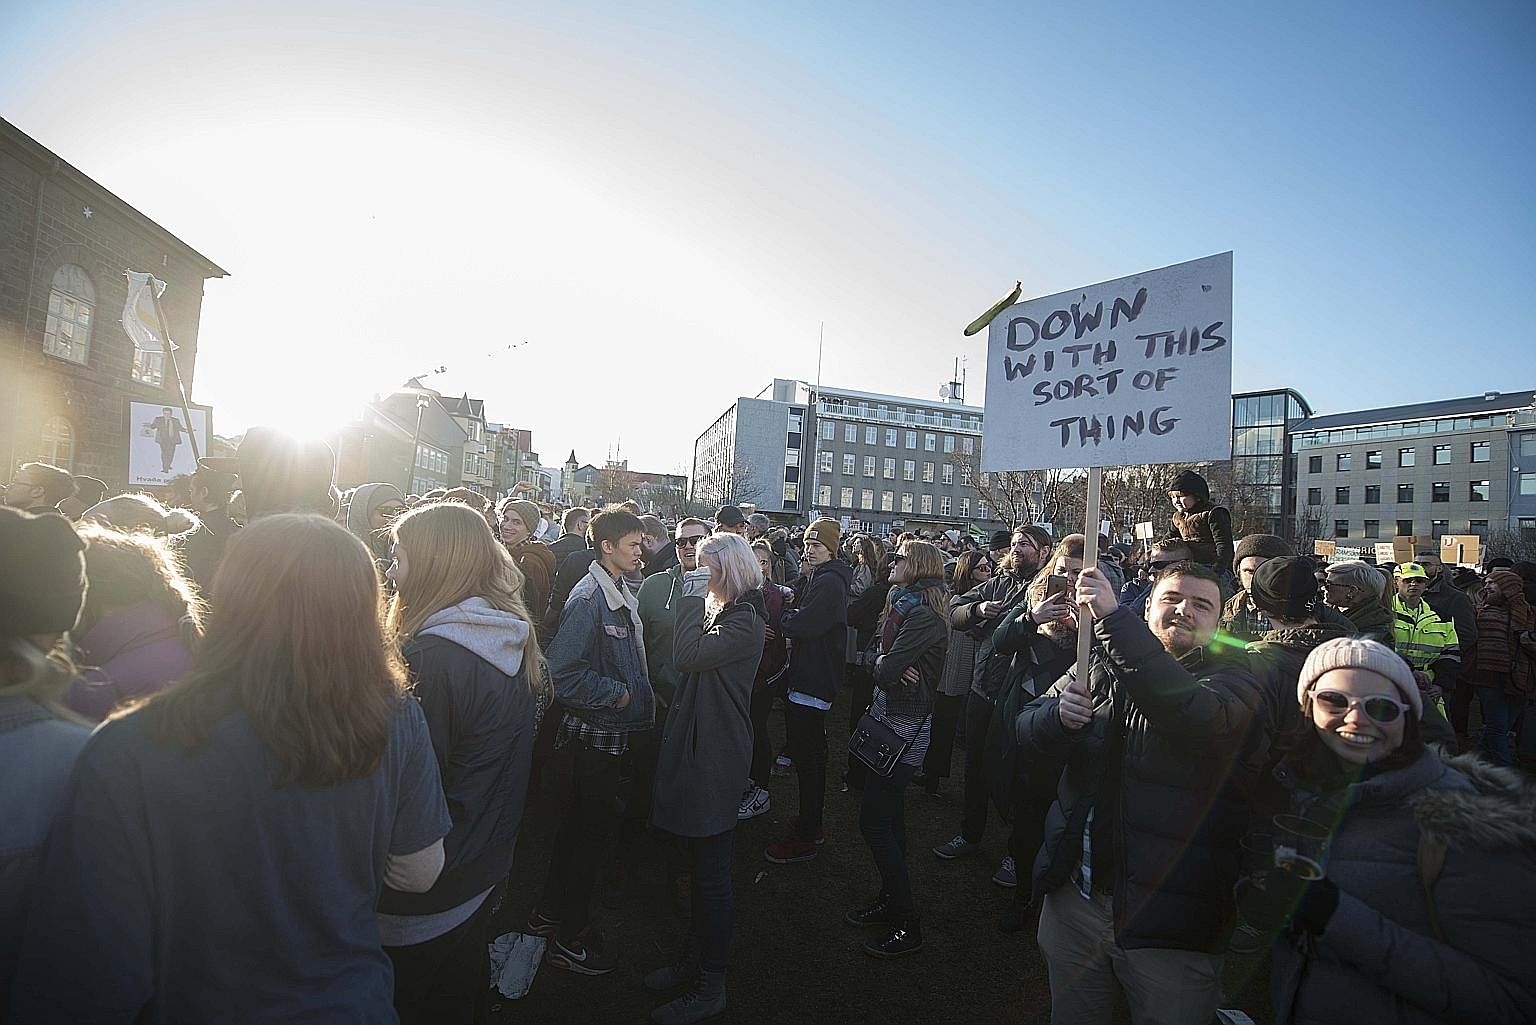 Protesters demanding the resignation of Iceland's Prime Minister Sigmundur David Gunnlaugsson outside Parliament in Reykjavik on Monday after the Panama Papers showed that he and his wife used an offshore firm to allegedly hide million-dollar investm